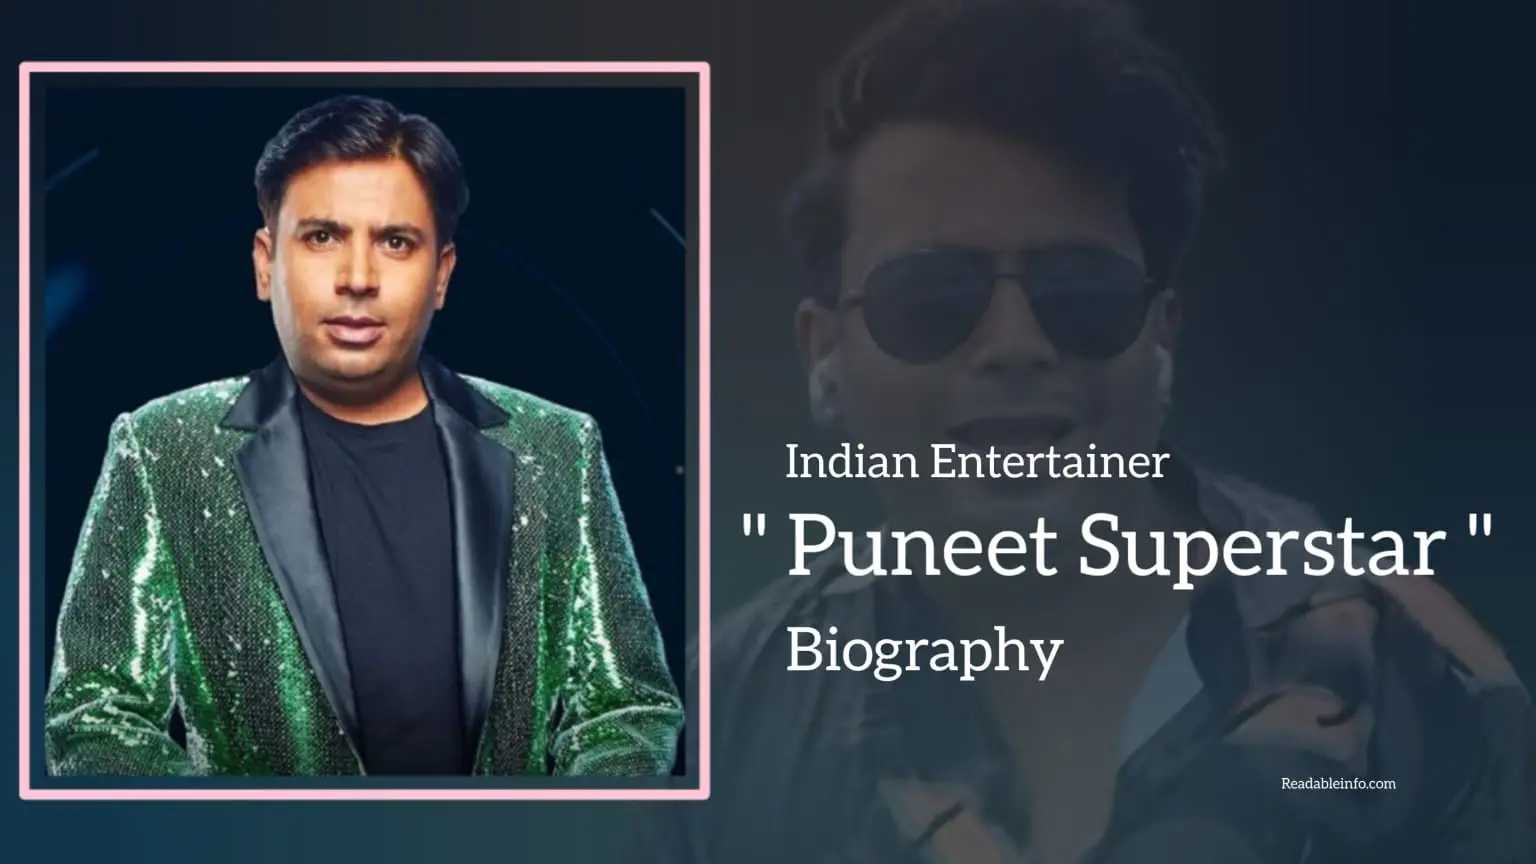 You are currently viewing Puneet Superstar Biography (Indian Entertainer)